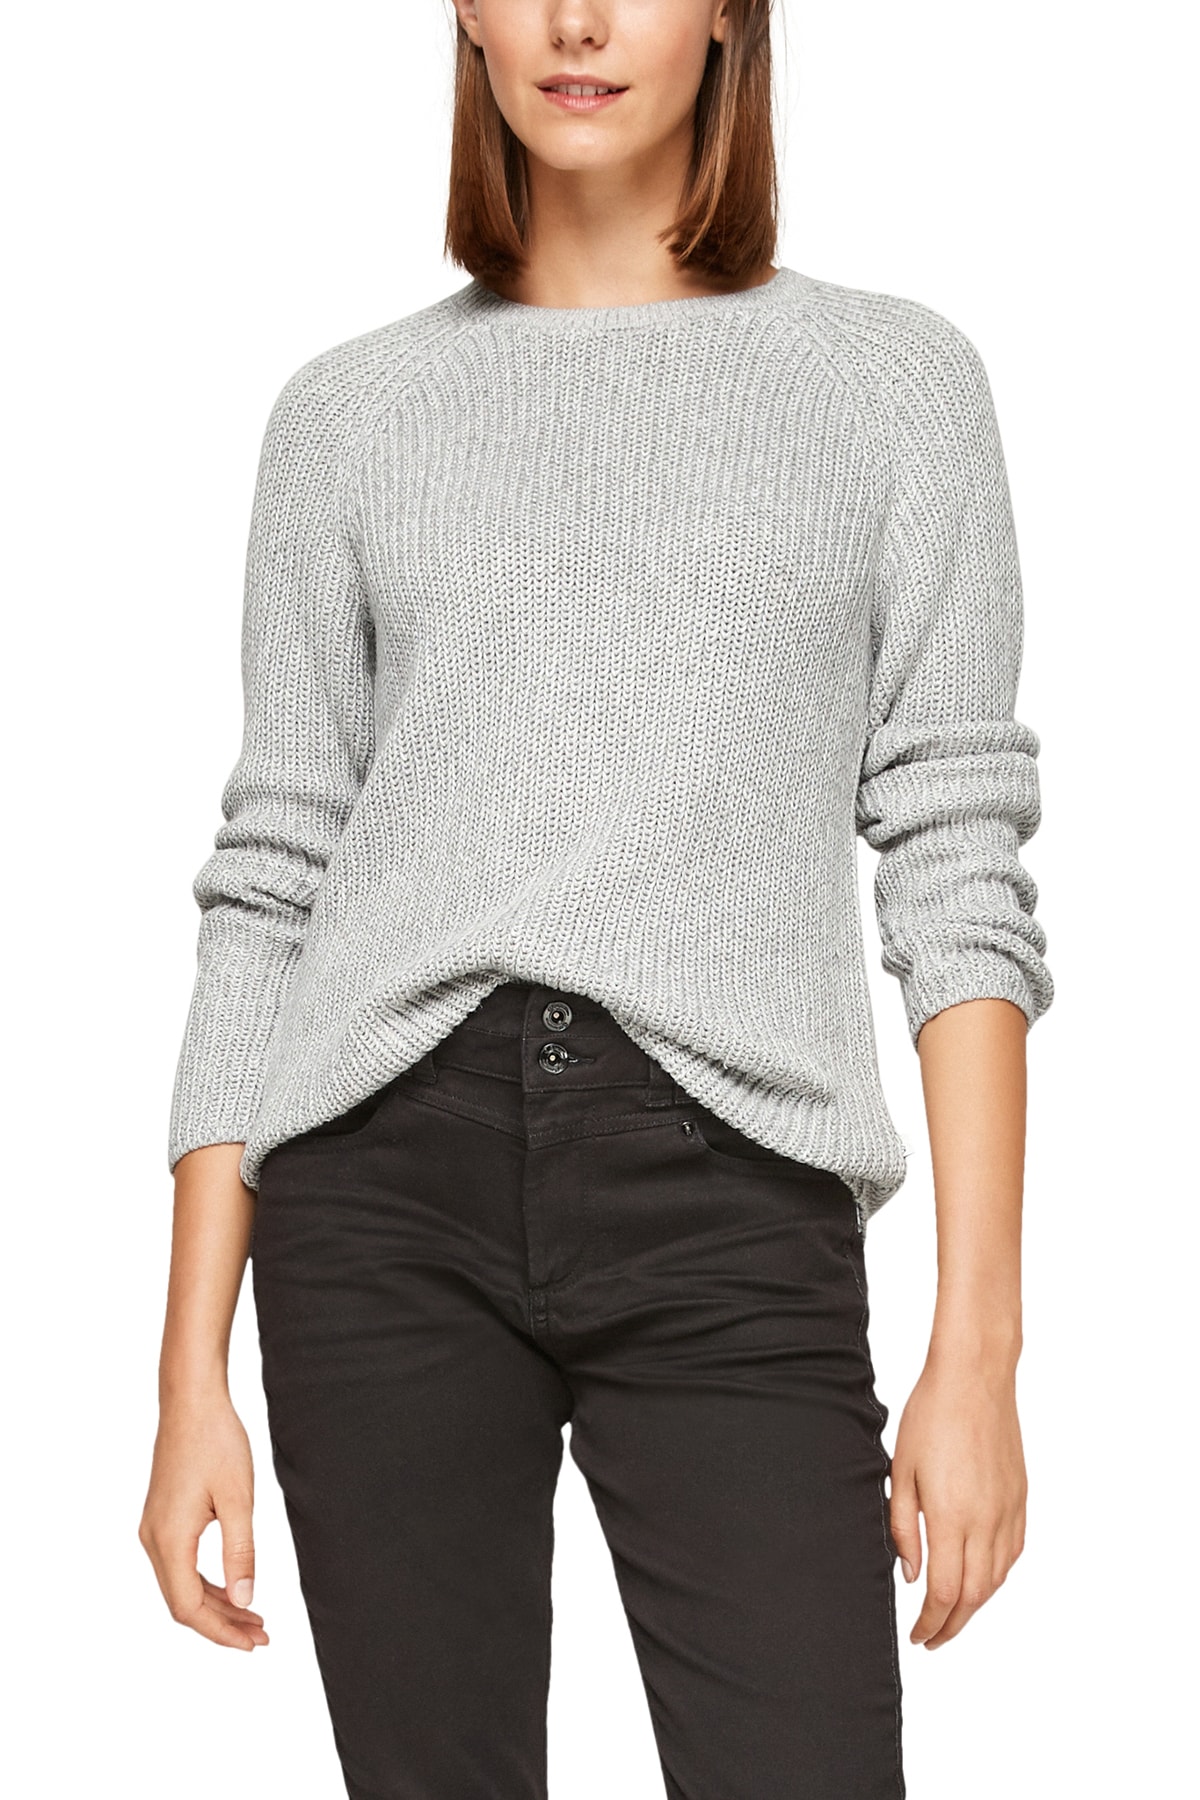 QS by s.Oliver Pullover Grau Figurbetont